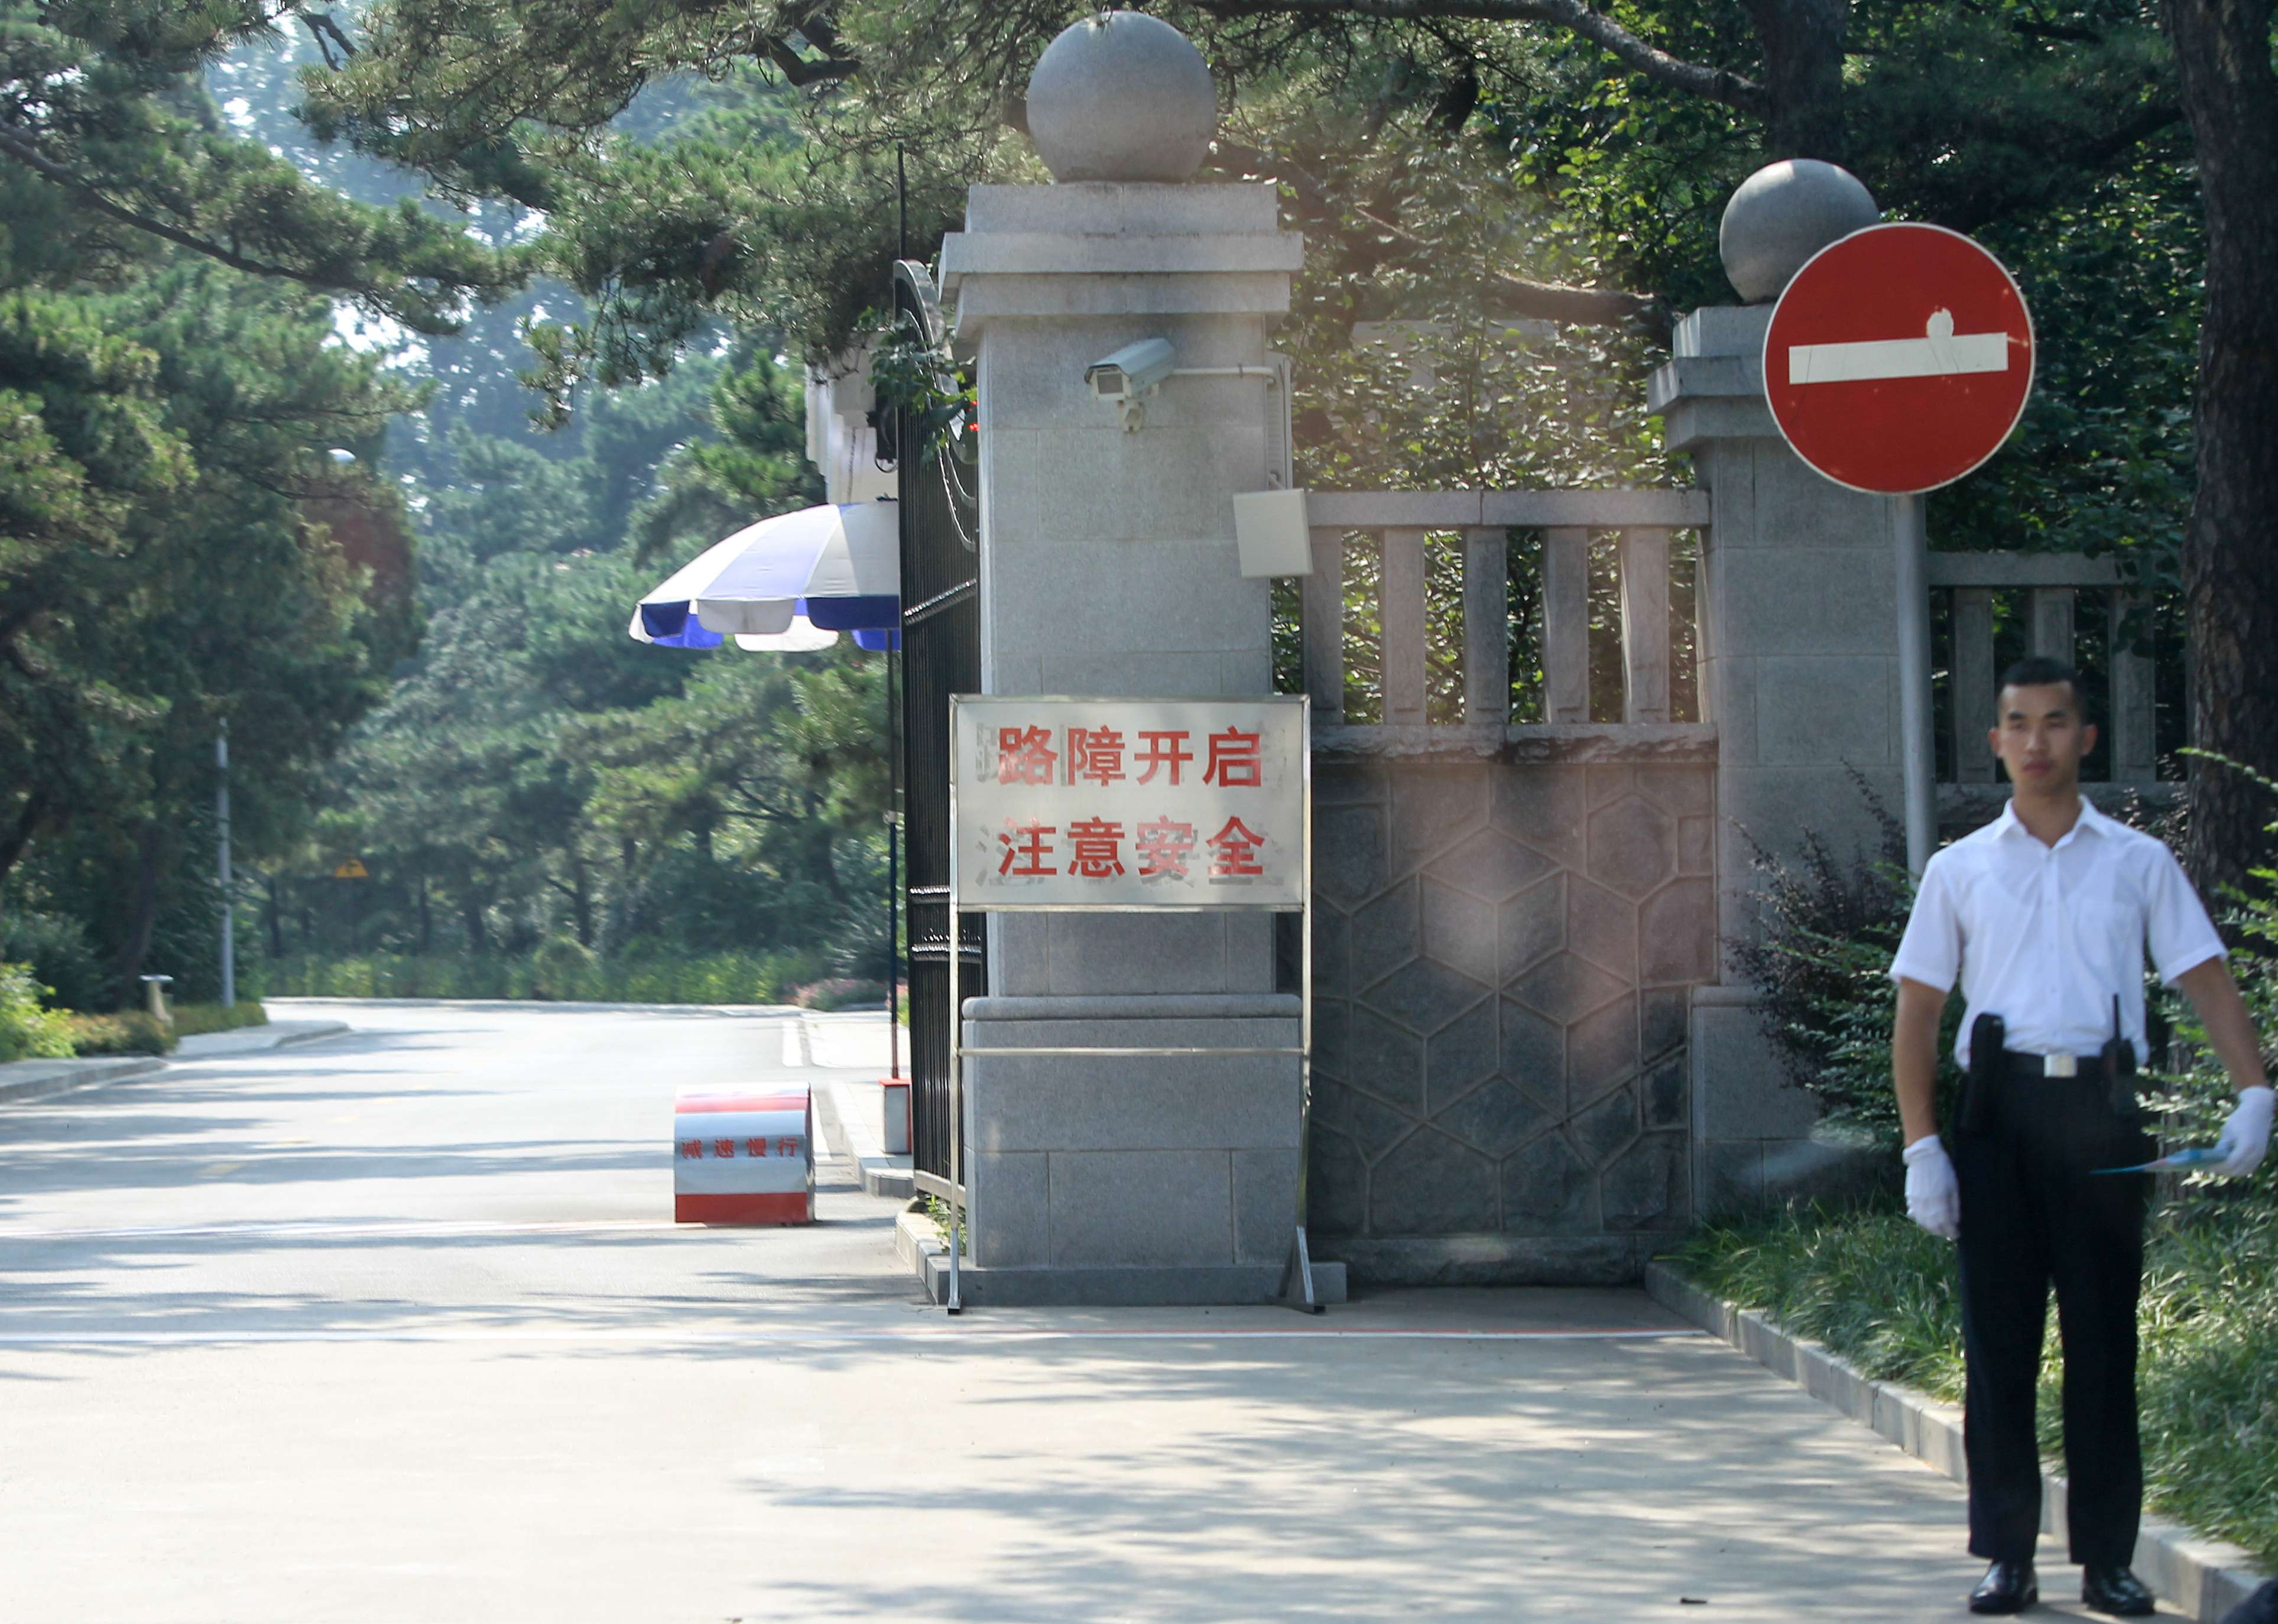 A security checkpoint outside a compound at Beidaihe in Qinhuangdao city in Hebei province. Photo: Simon Song